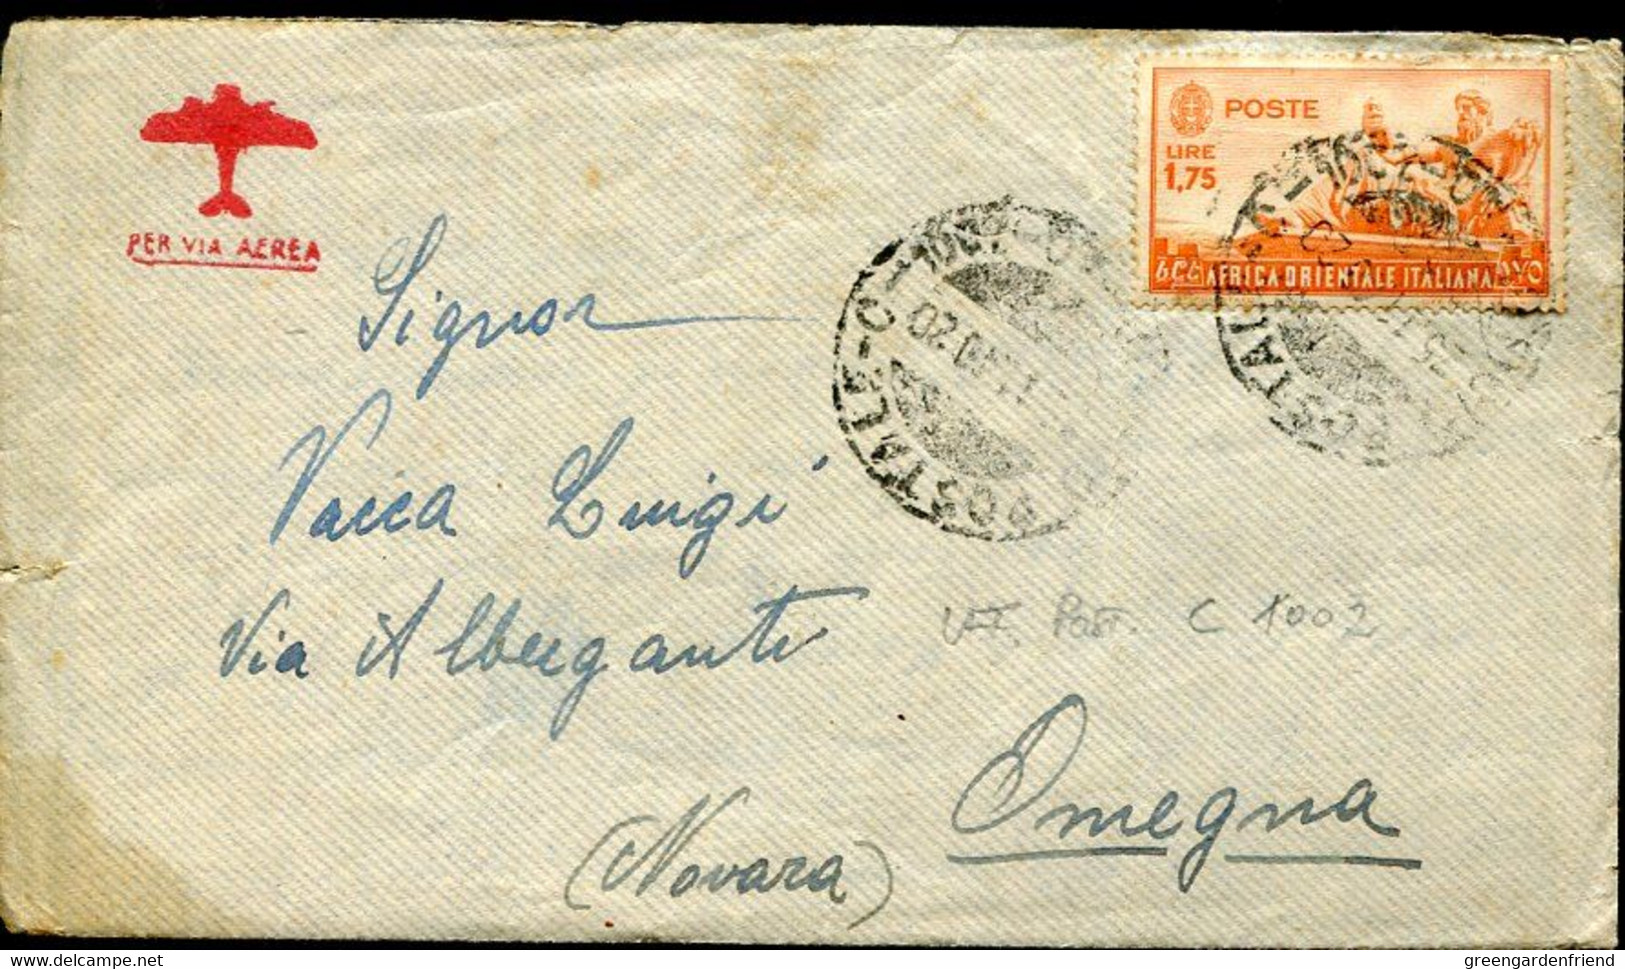 61094 Africa Orientale Italiana,military Post Office Nr.1002,cover Circuled To Omegna 25.11.1940, 1,75 Lire Stamp - Africa Orientale Italiana